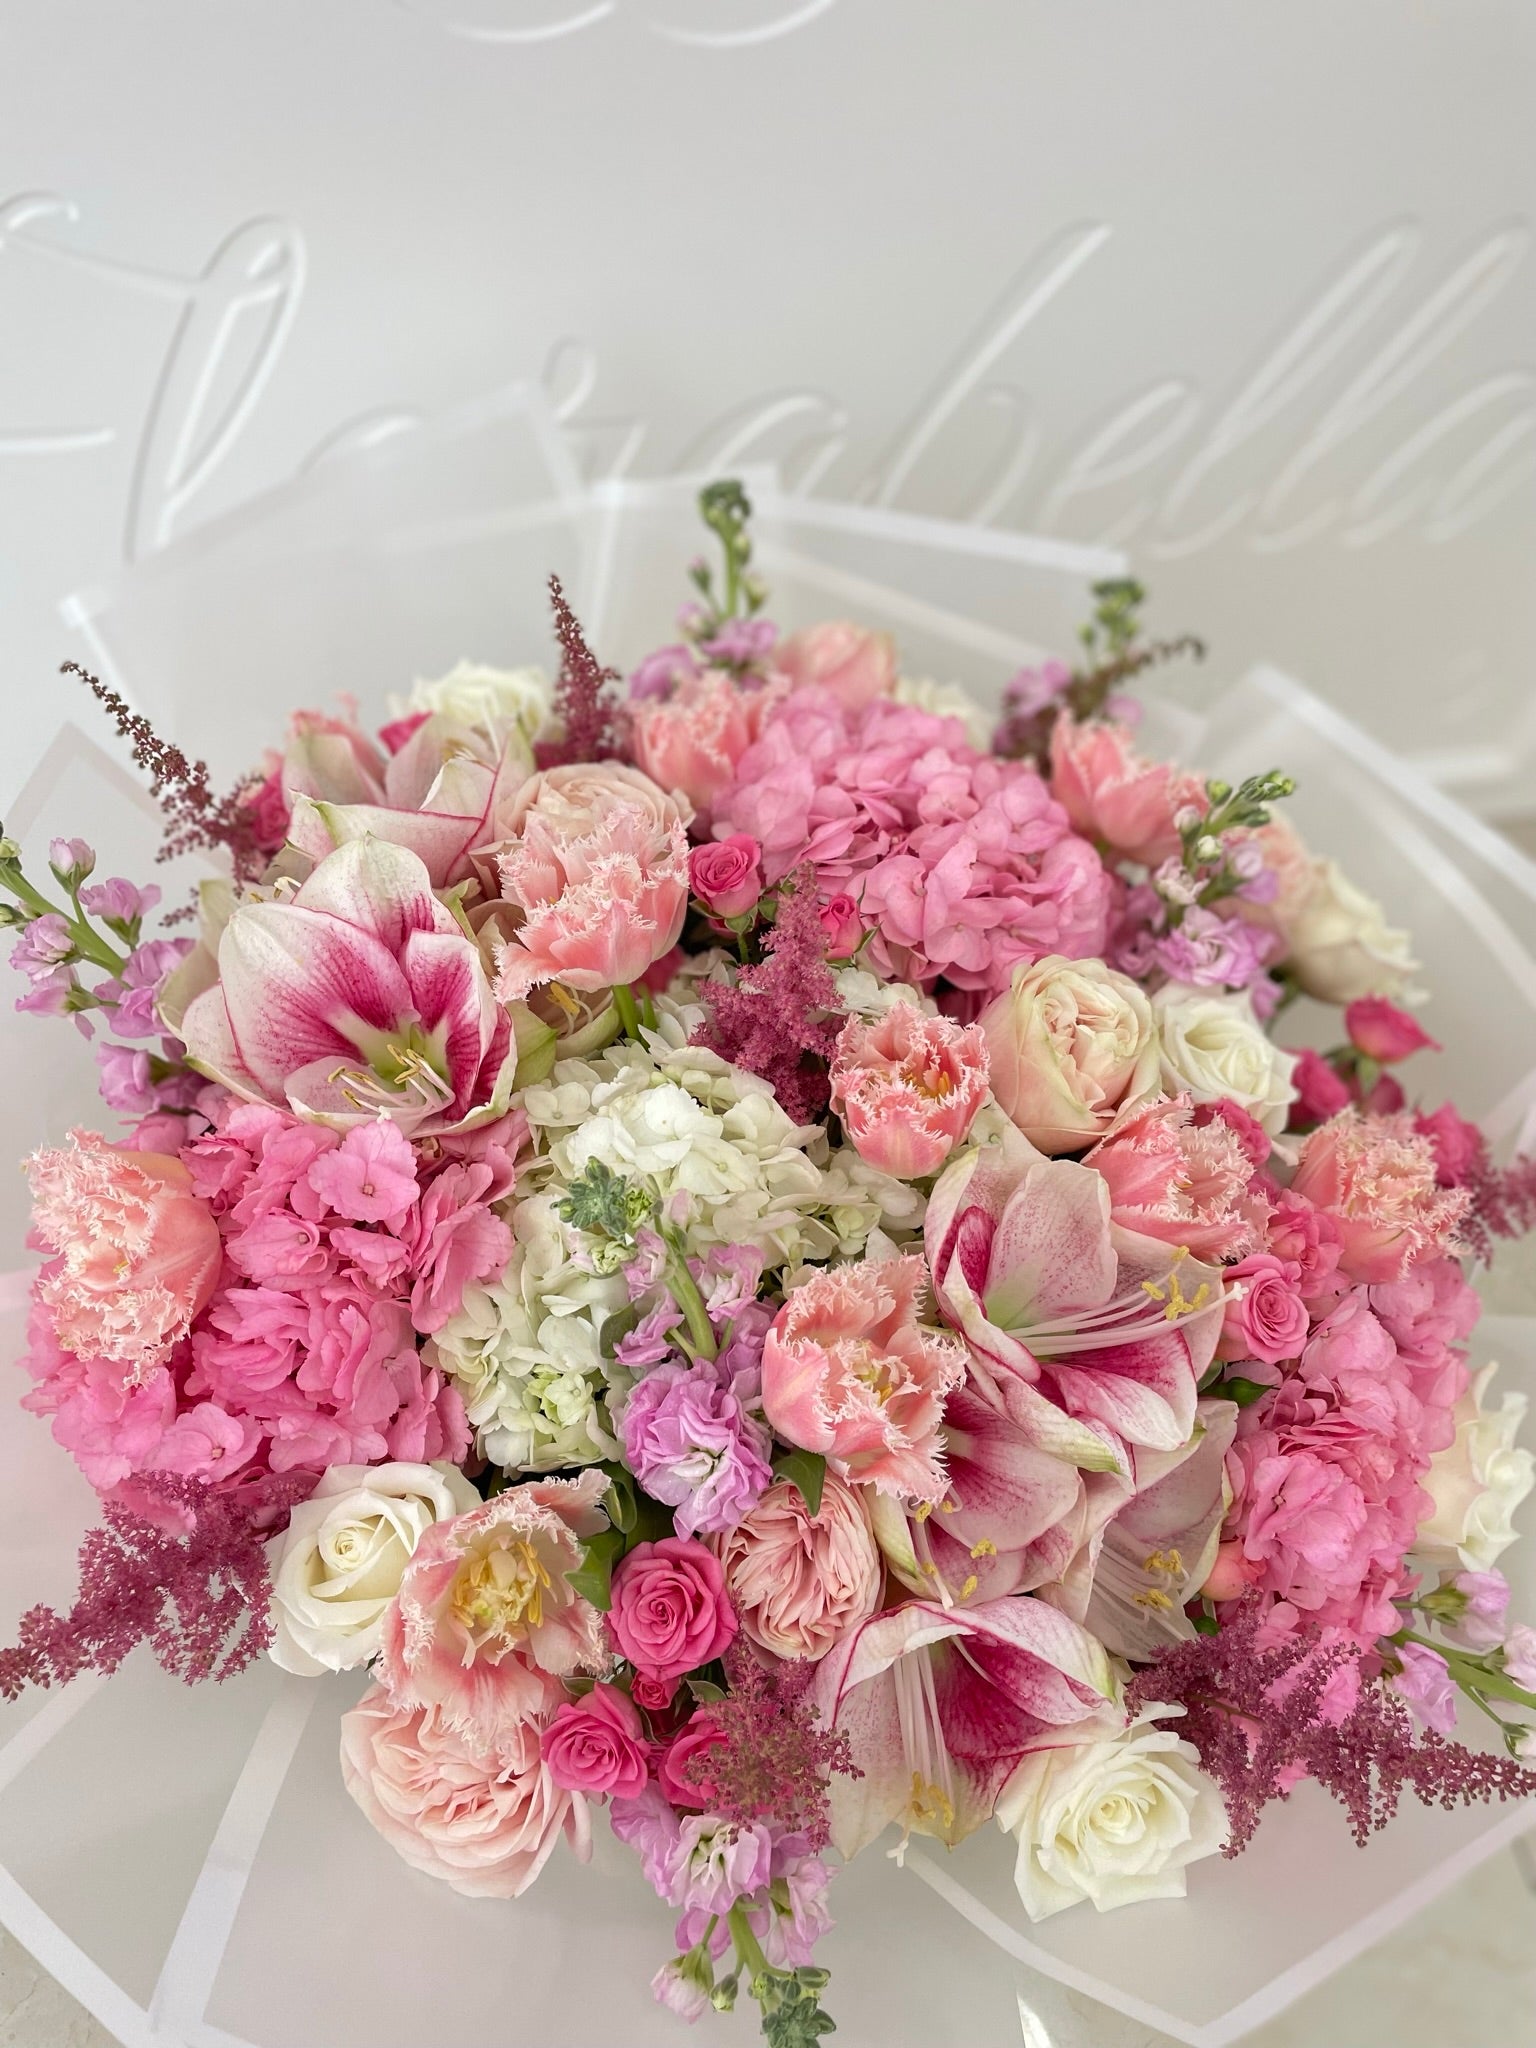 A giant bouquet of mixed pink flowers